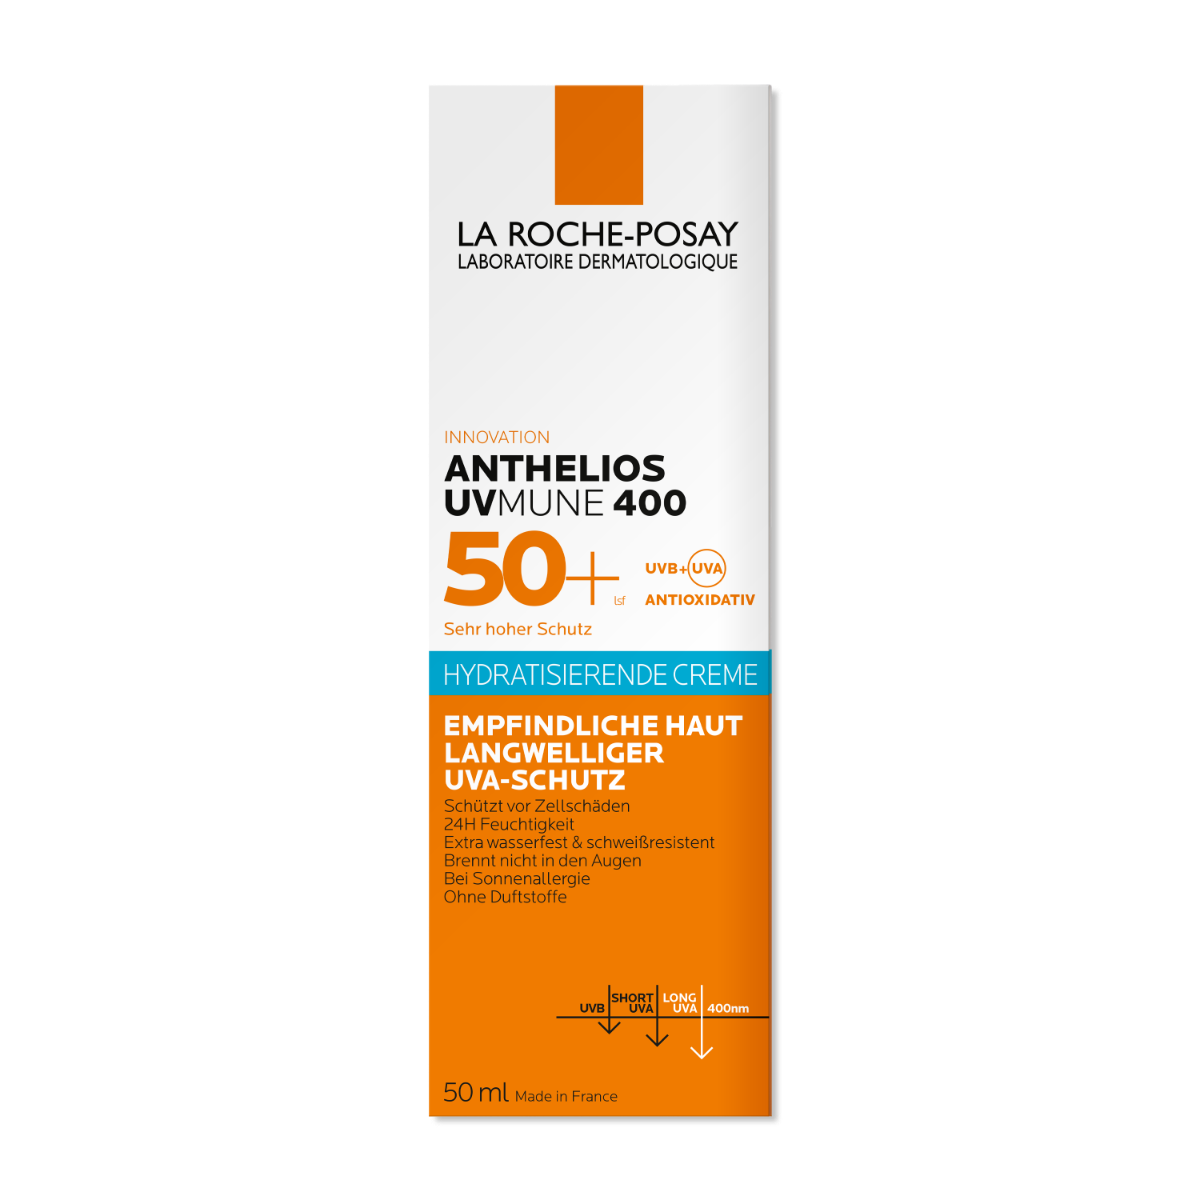 Image of La Roche-Posay Anthelios Hydratisierende Creme UVMune 400 LSF 50+ 50ML